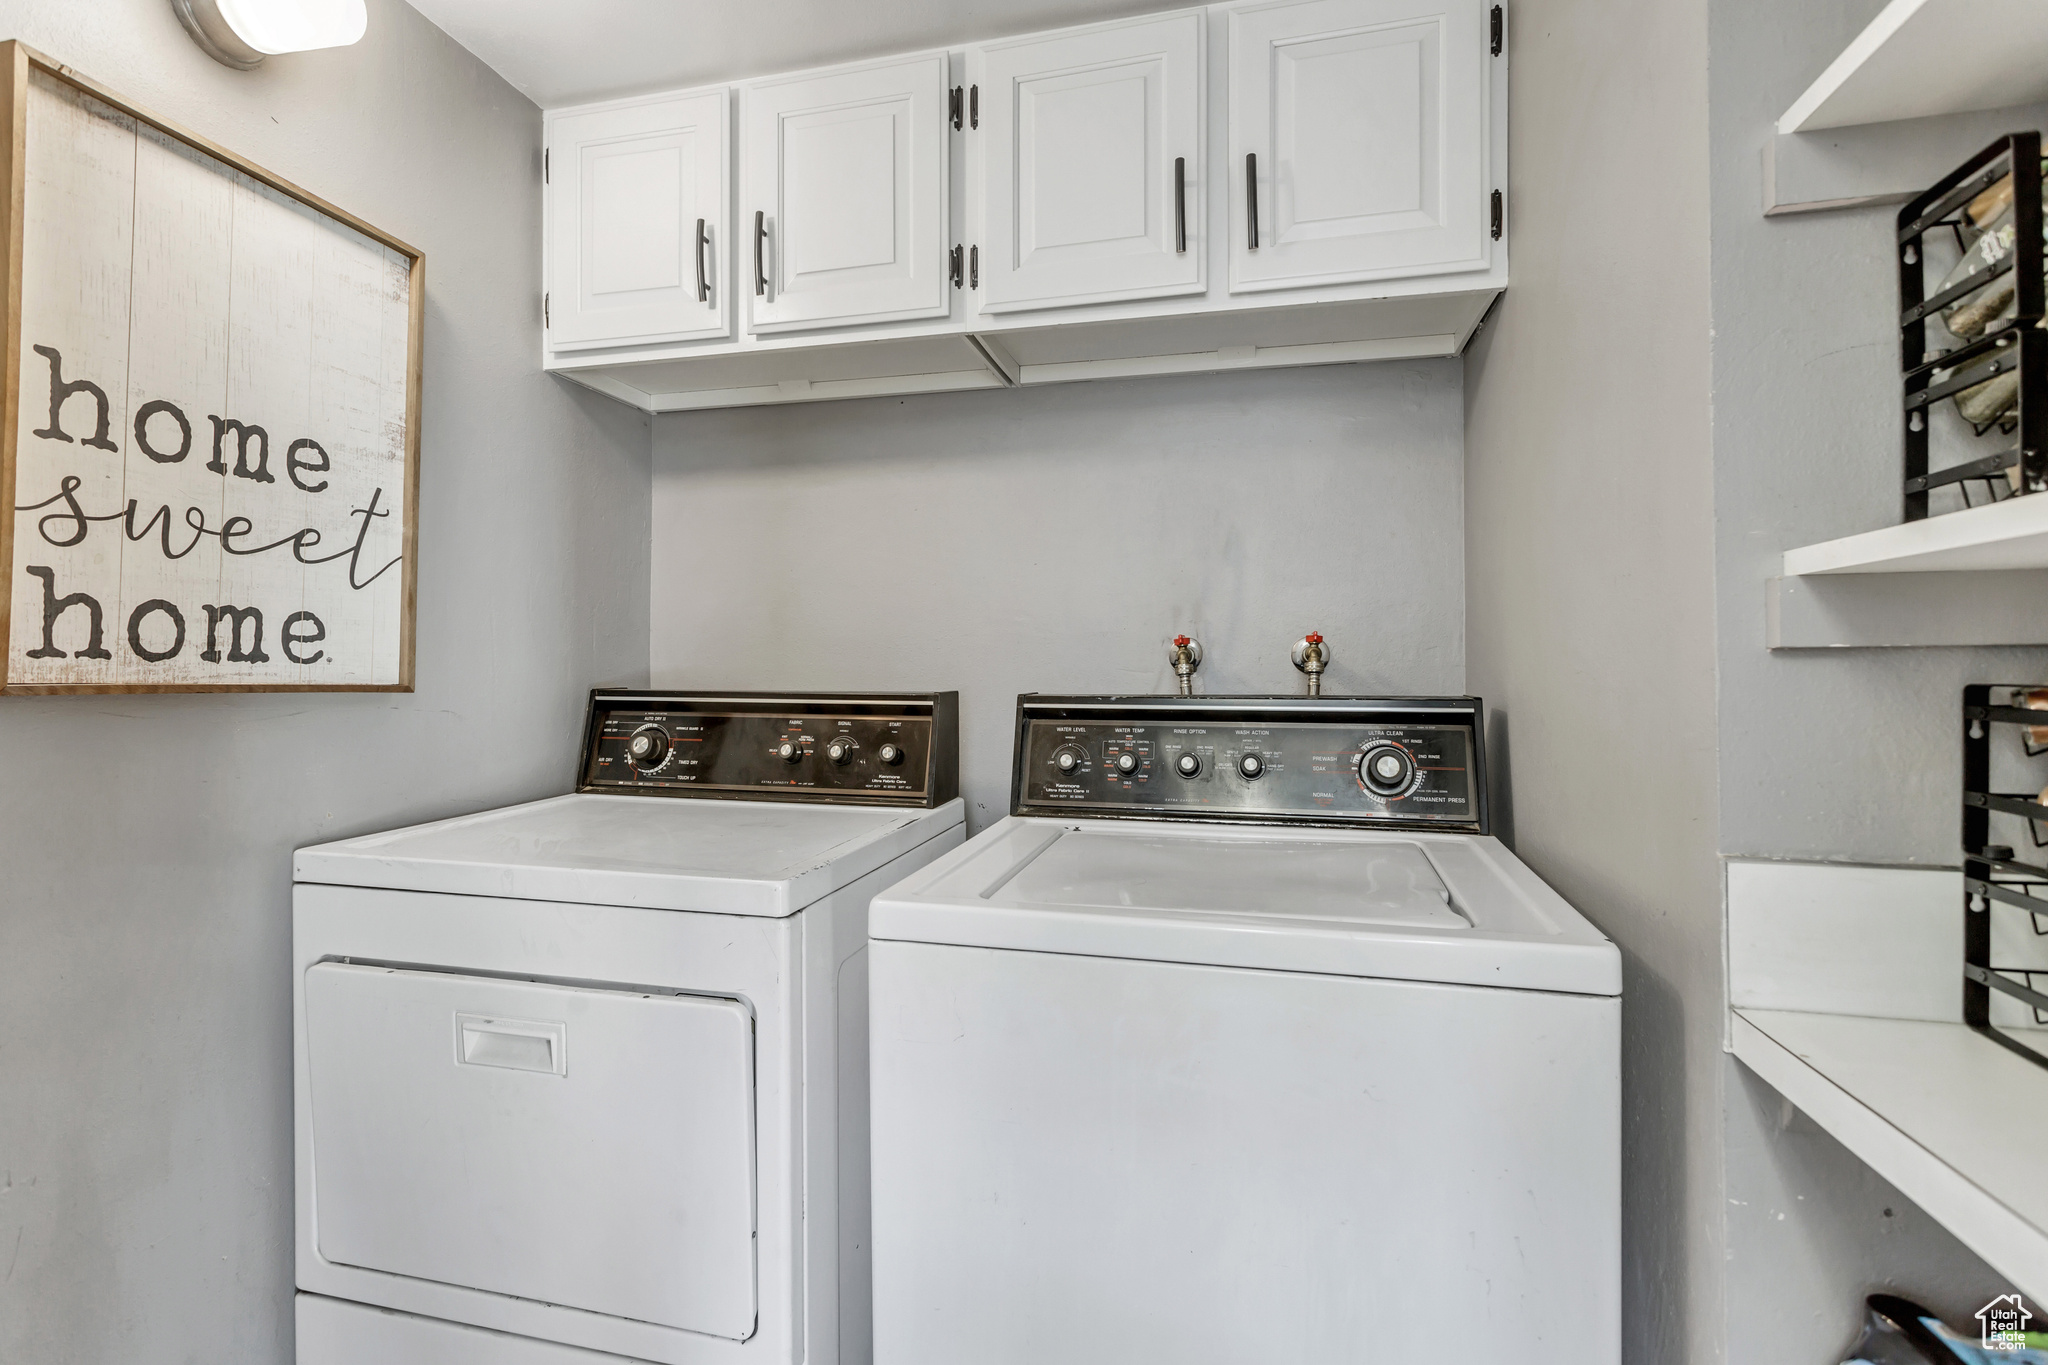 Clothes washing area with cabinets, washer hookup, and washer and clothes dryer